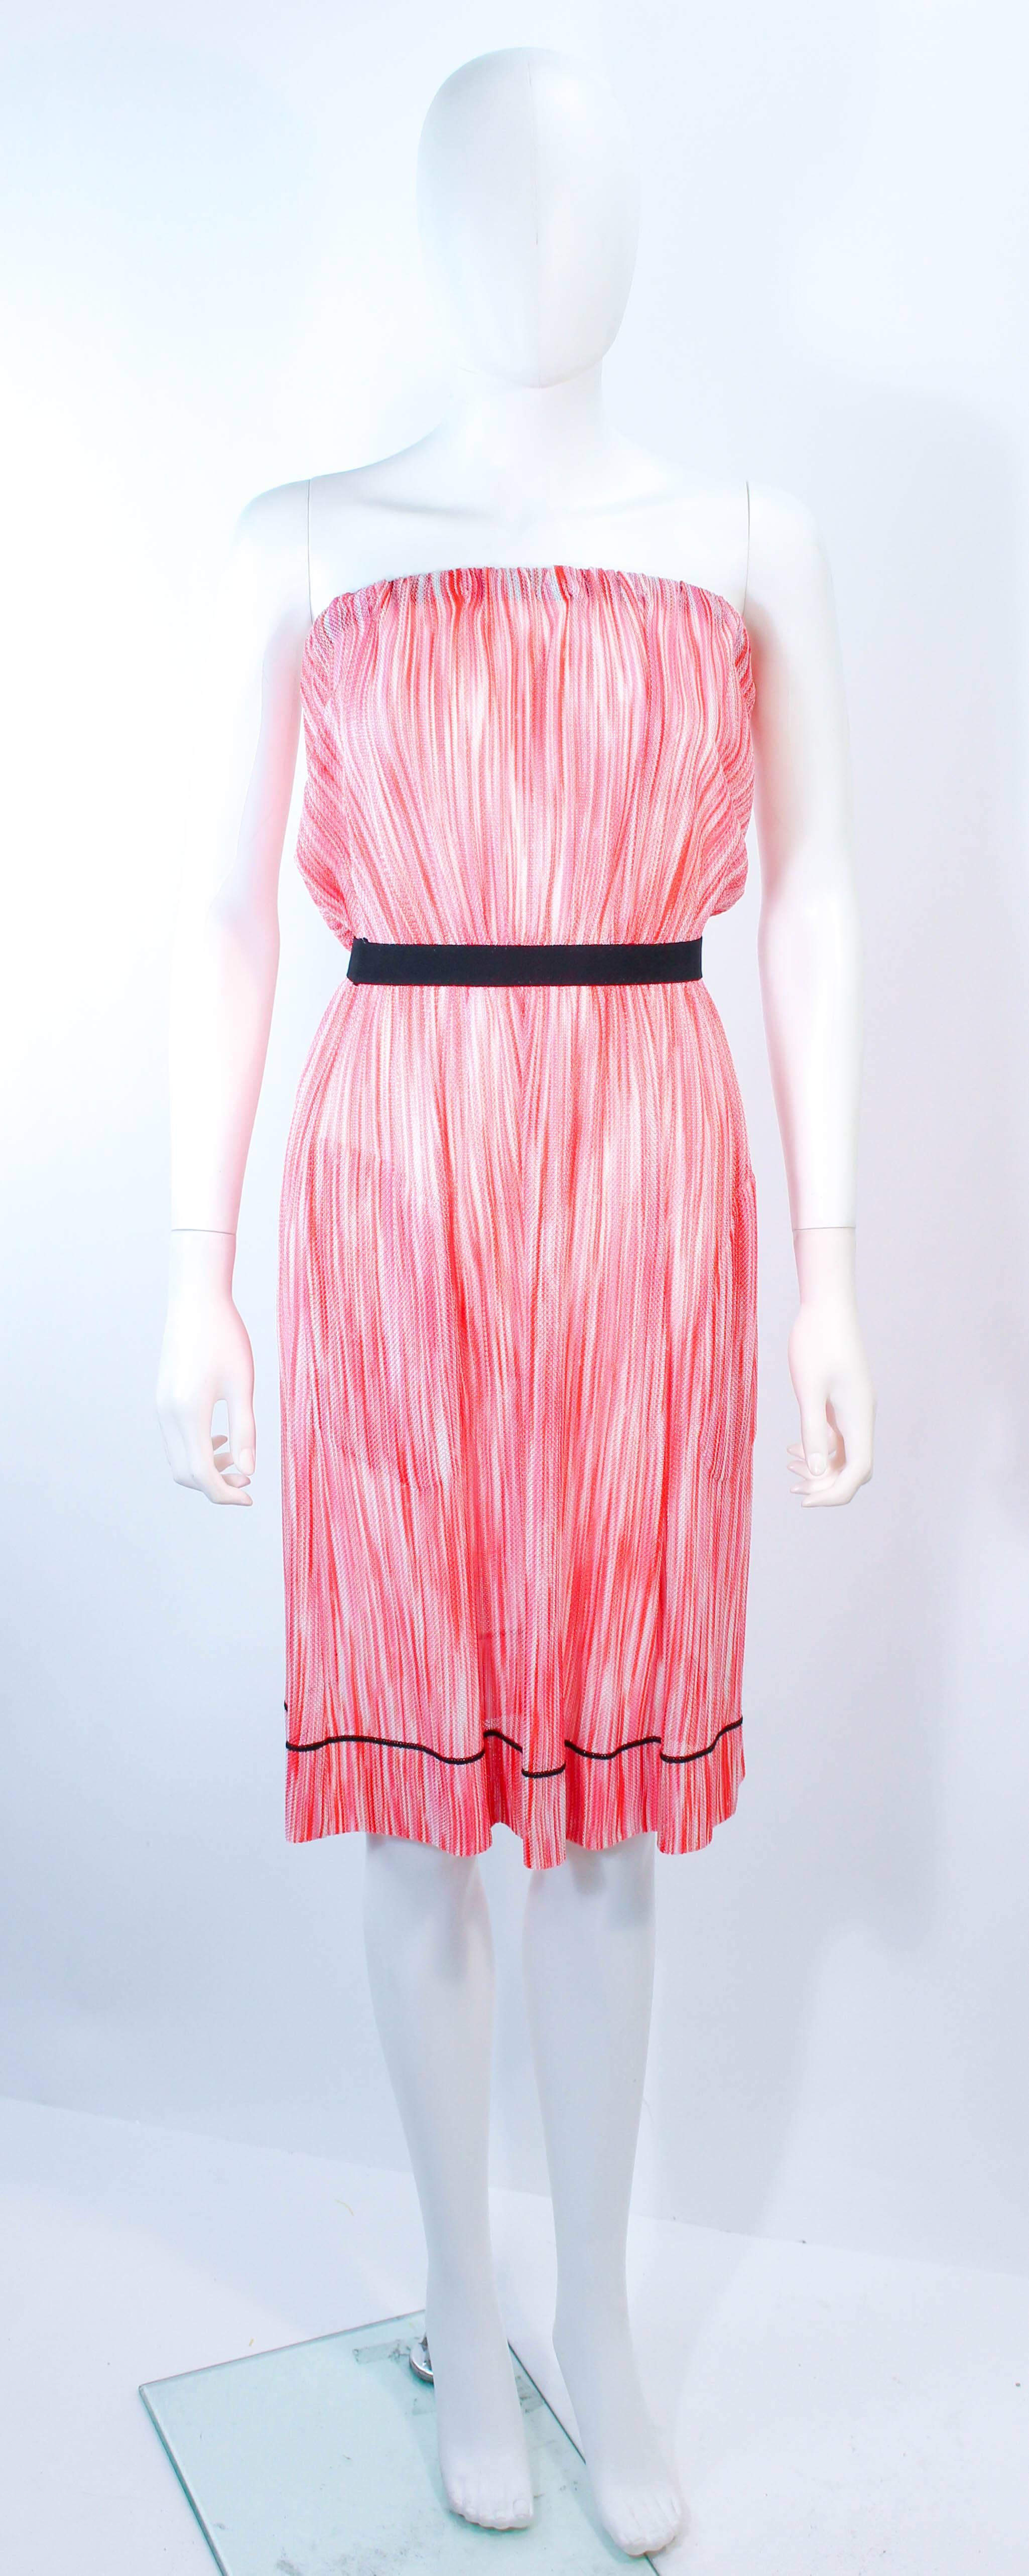 This Missoni dress is composed of a orange, white, and pink knit. Features a pull over style. In excellent condition.

**Please cross-reference measurements for personal accuracy. Size in description box is an estimation. 

Measures